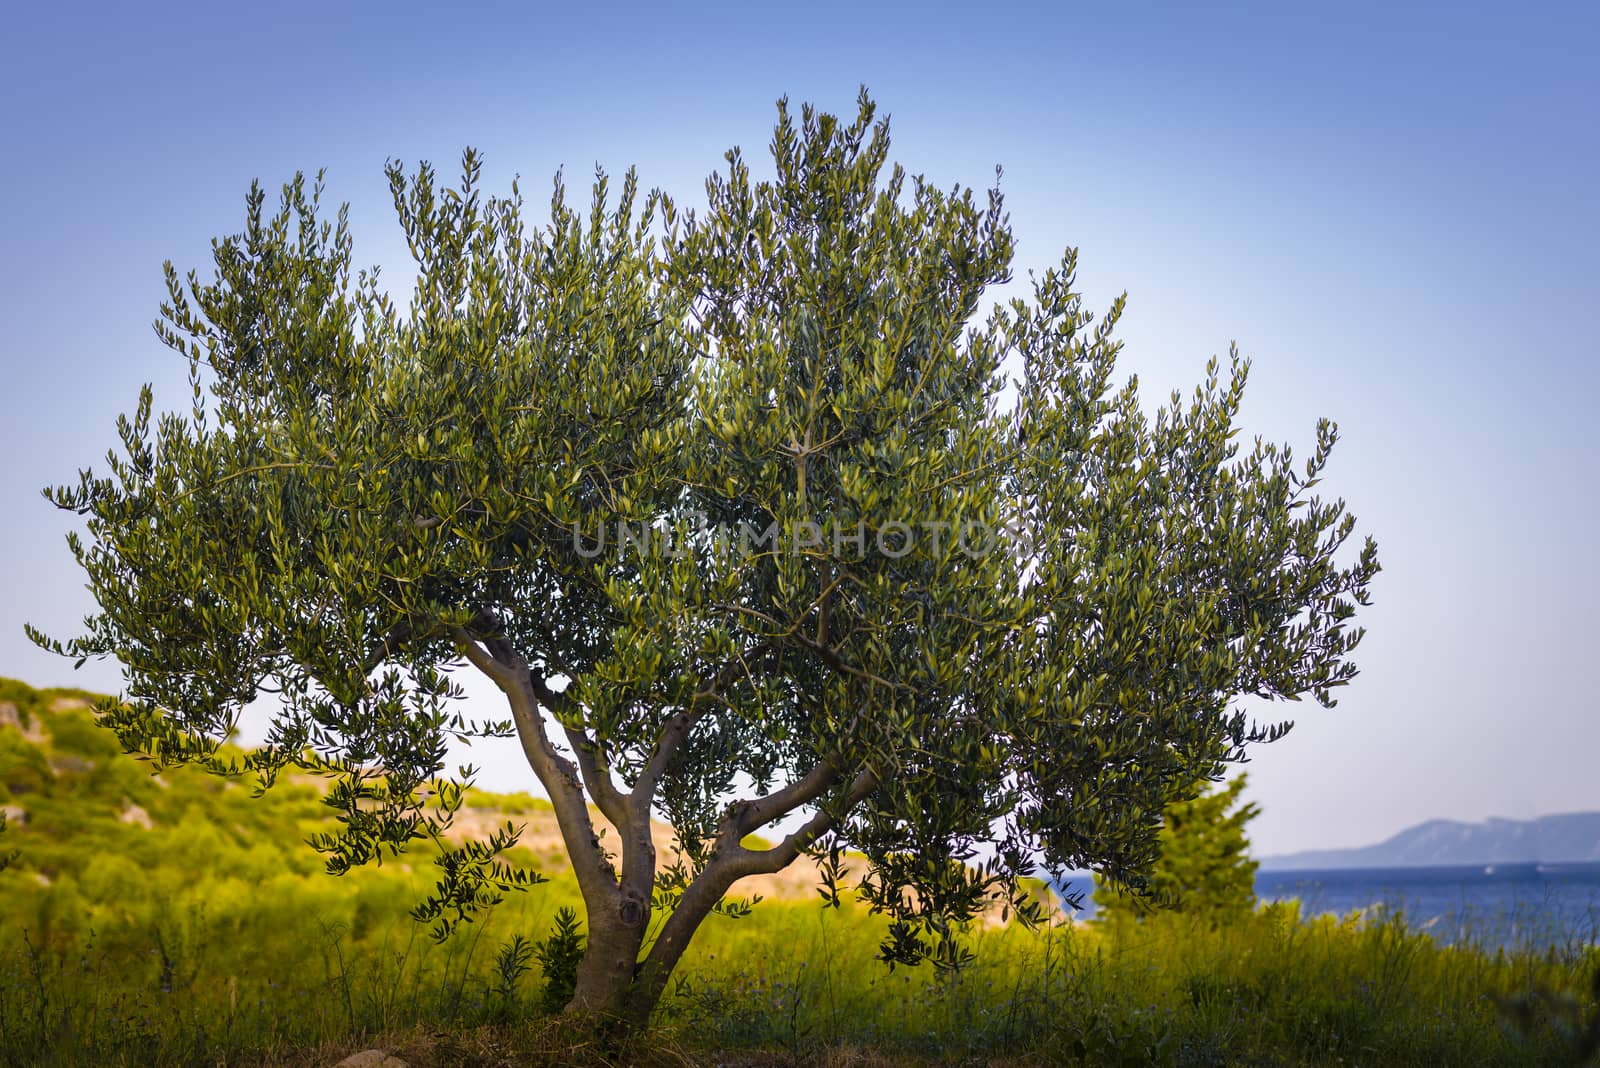 Olive tree at sunset, sea and islands in background by asafaric